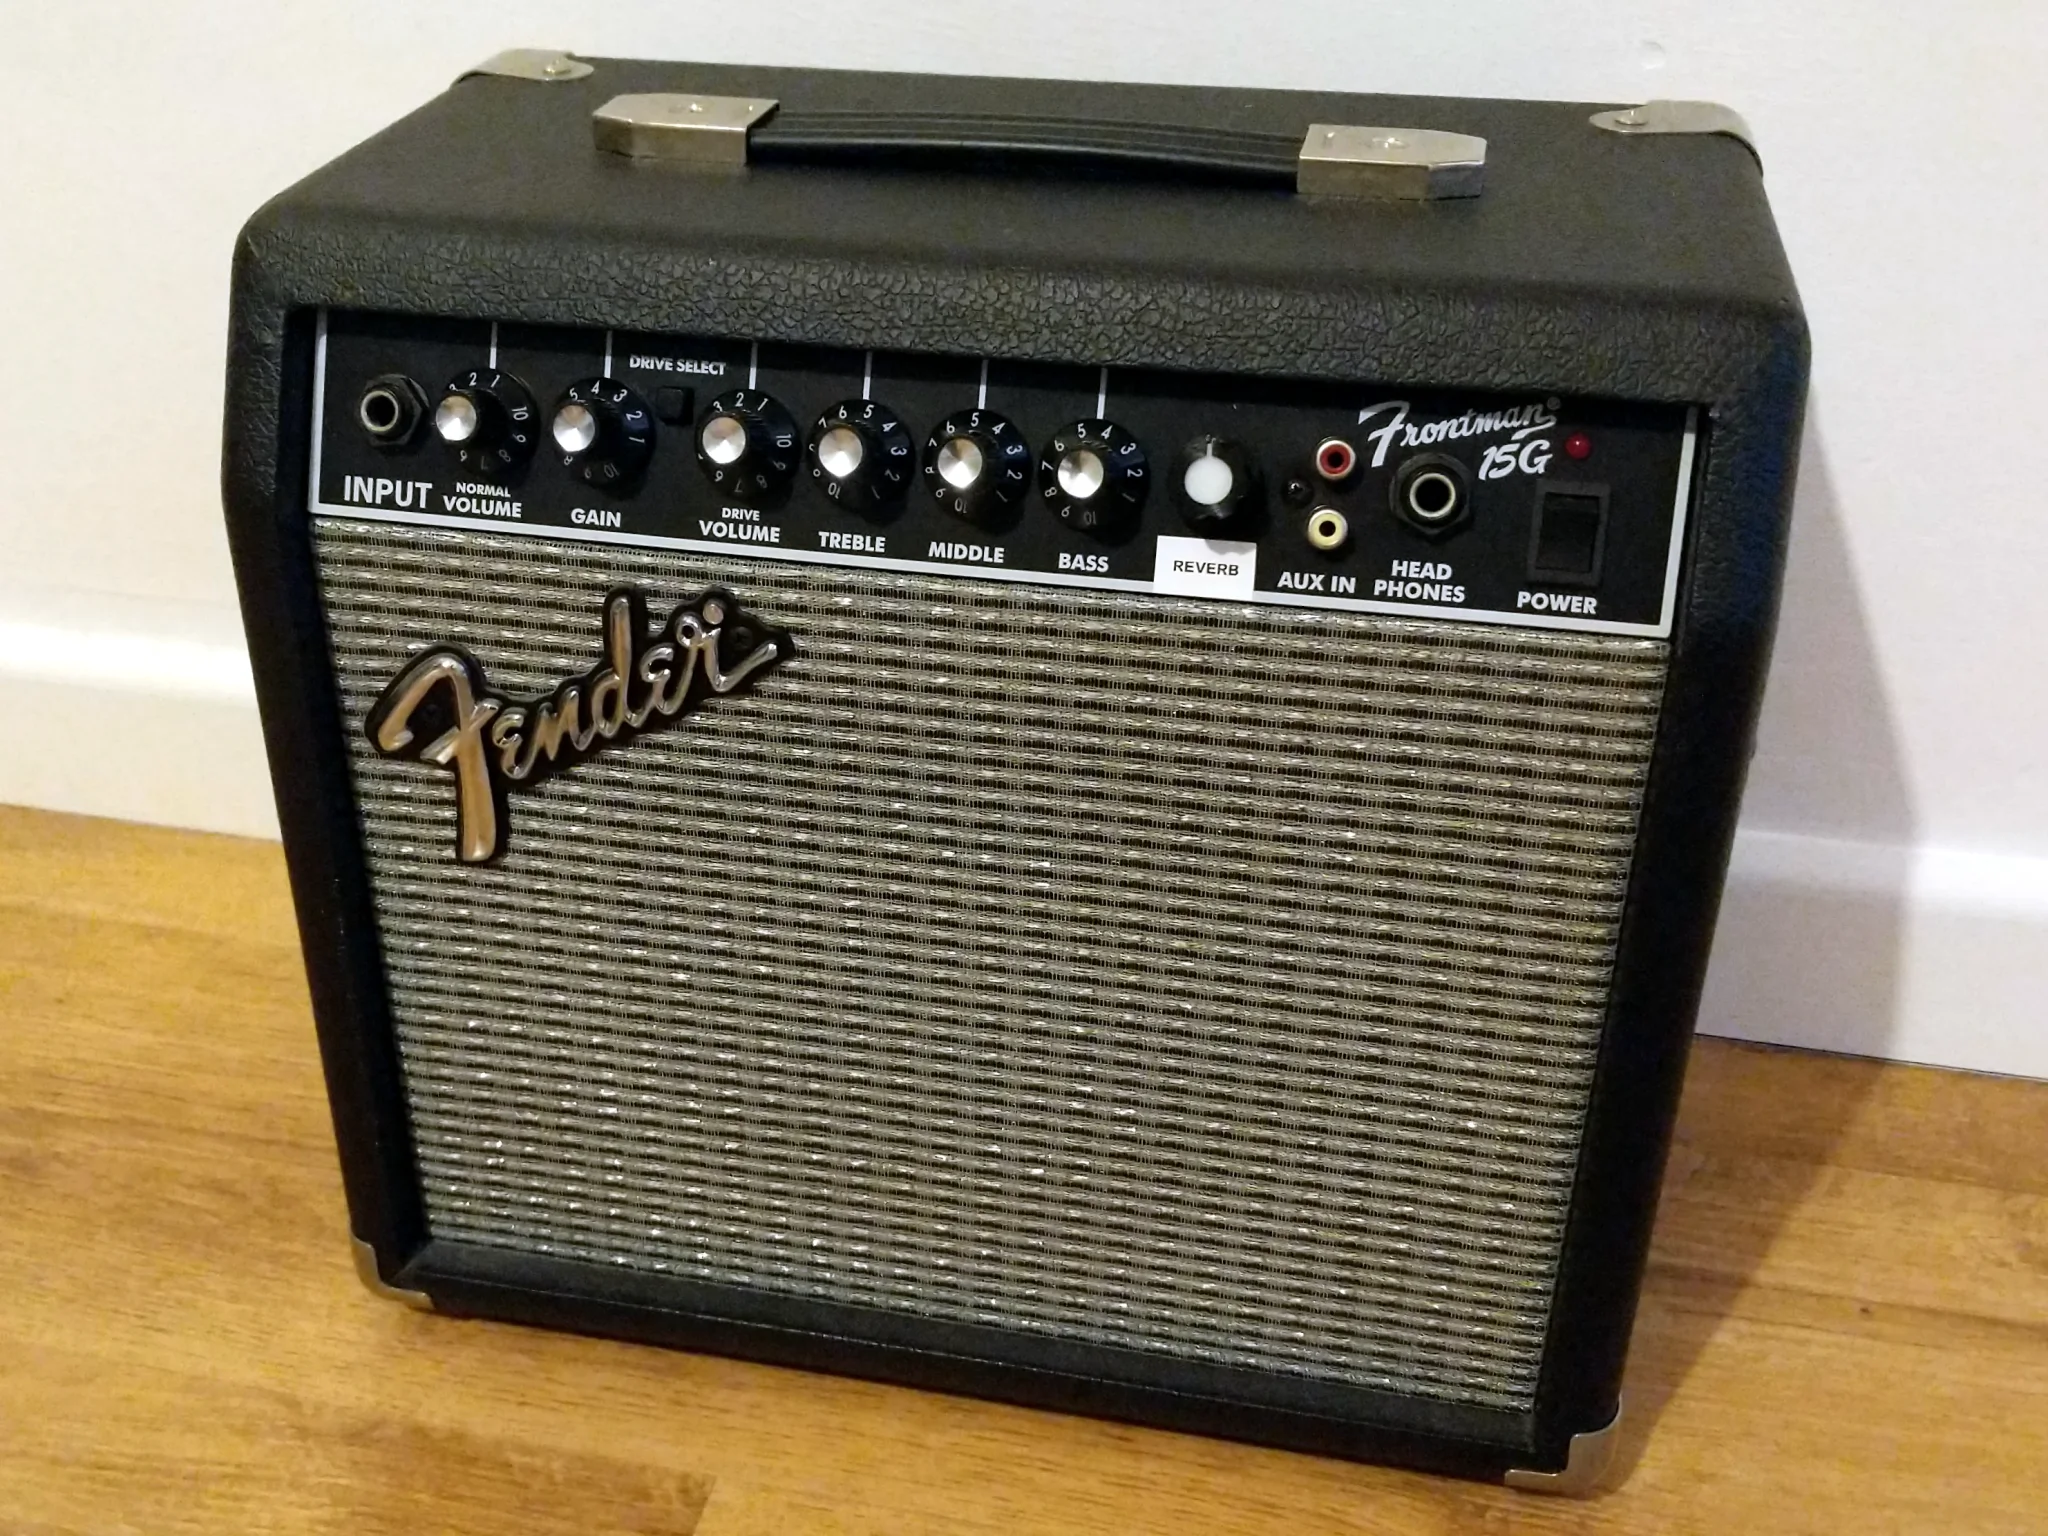 Fender Frontman 15G
with retrofitted reverb circuit and knob